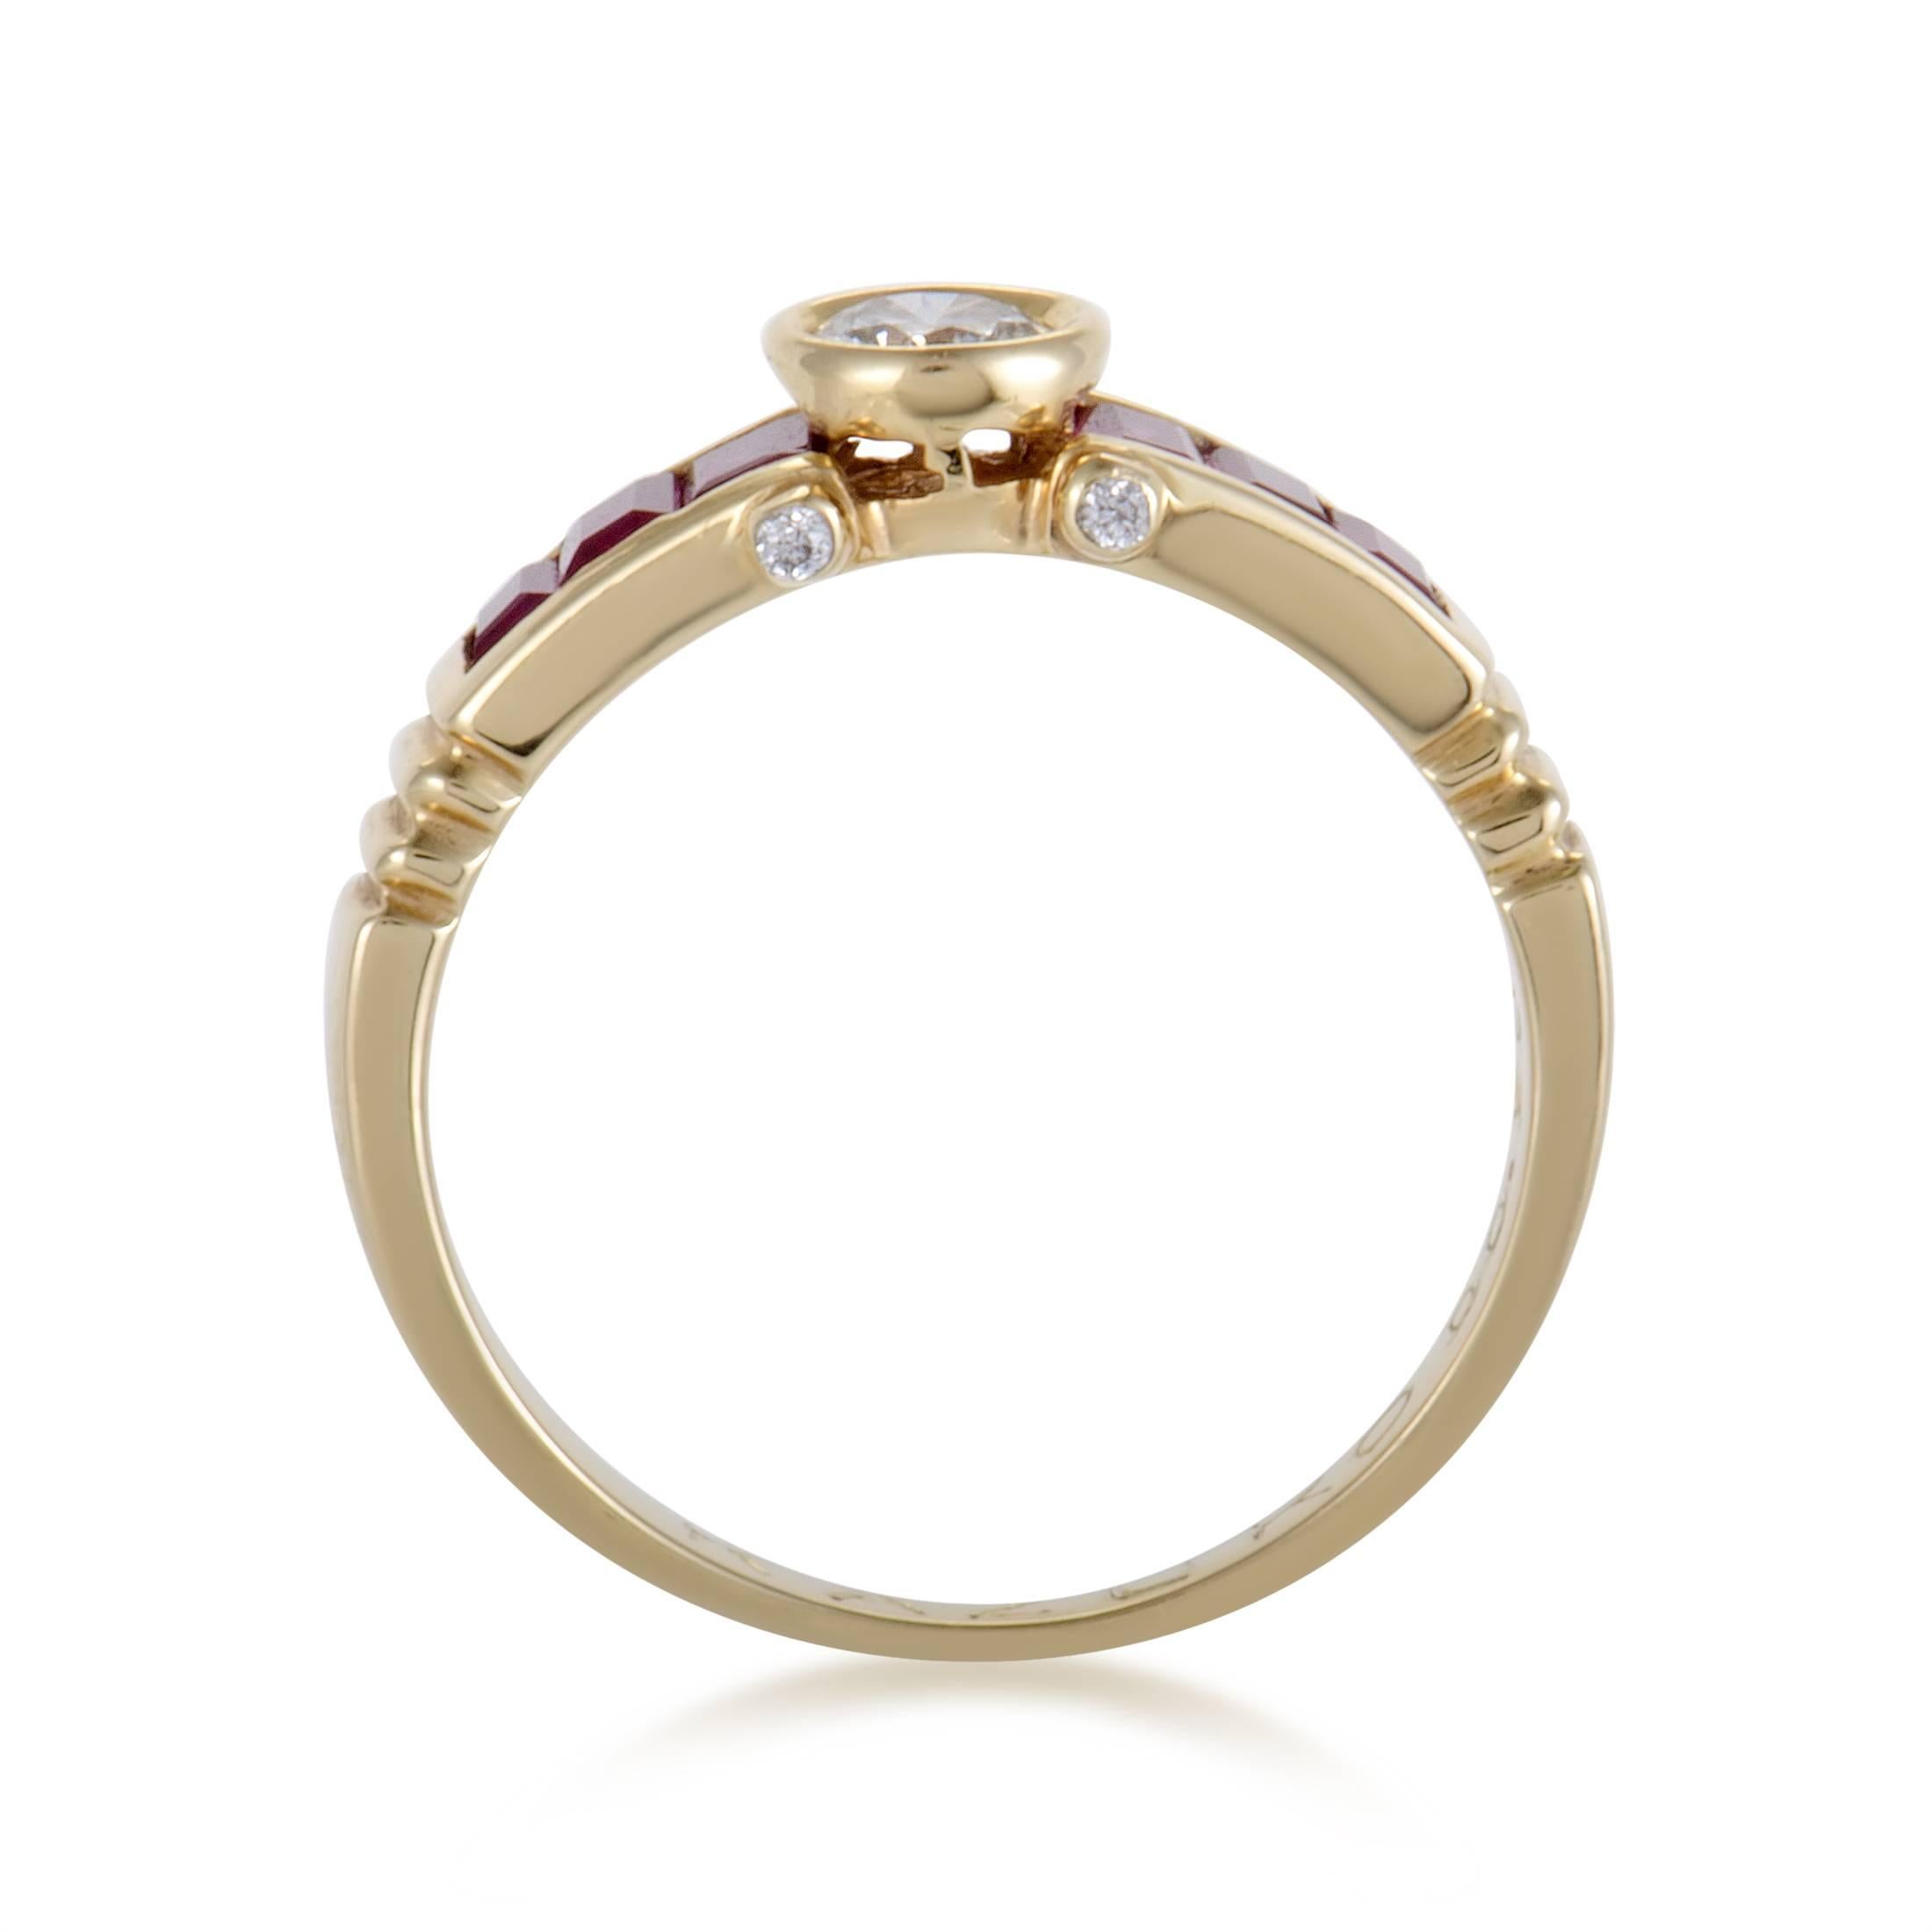 Placed against the fabulously feminine blend of precious 18K yellow gold and exquisitely cut rubies, the resplendent diamond takes the total diamond weight to 0.25ct of prestigious luster and compels with its marvelous shape in this magnificent ring